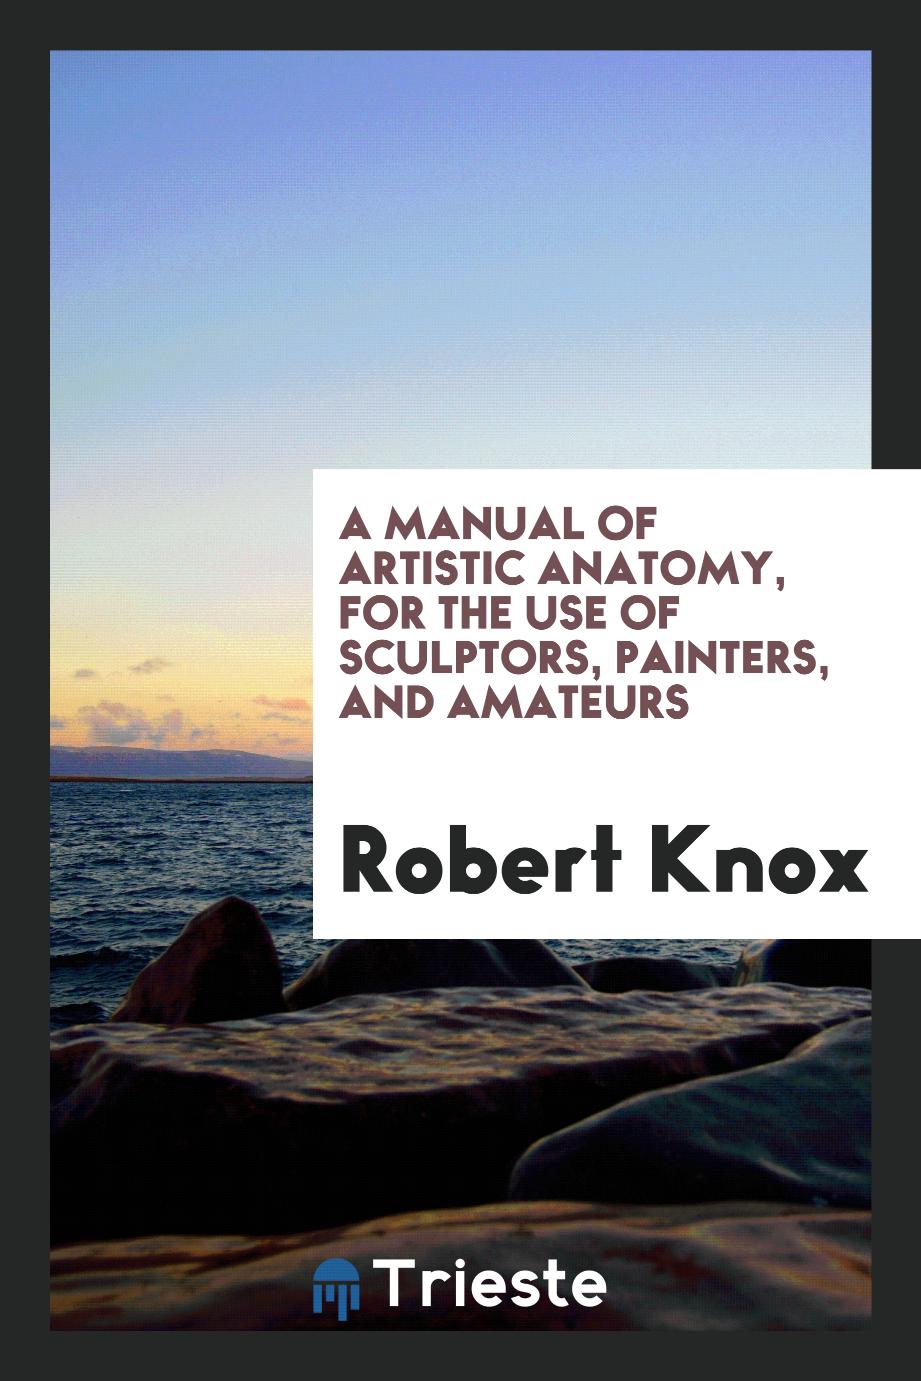 A Manual of Artistic Anatomy, for the Use of Sculptors, Painters, and Amateurs